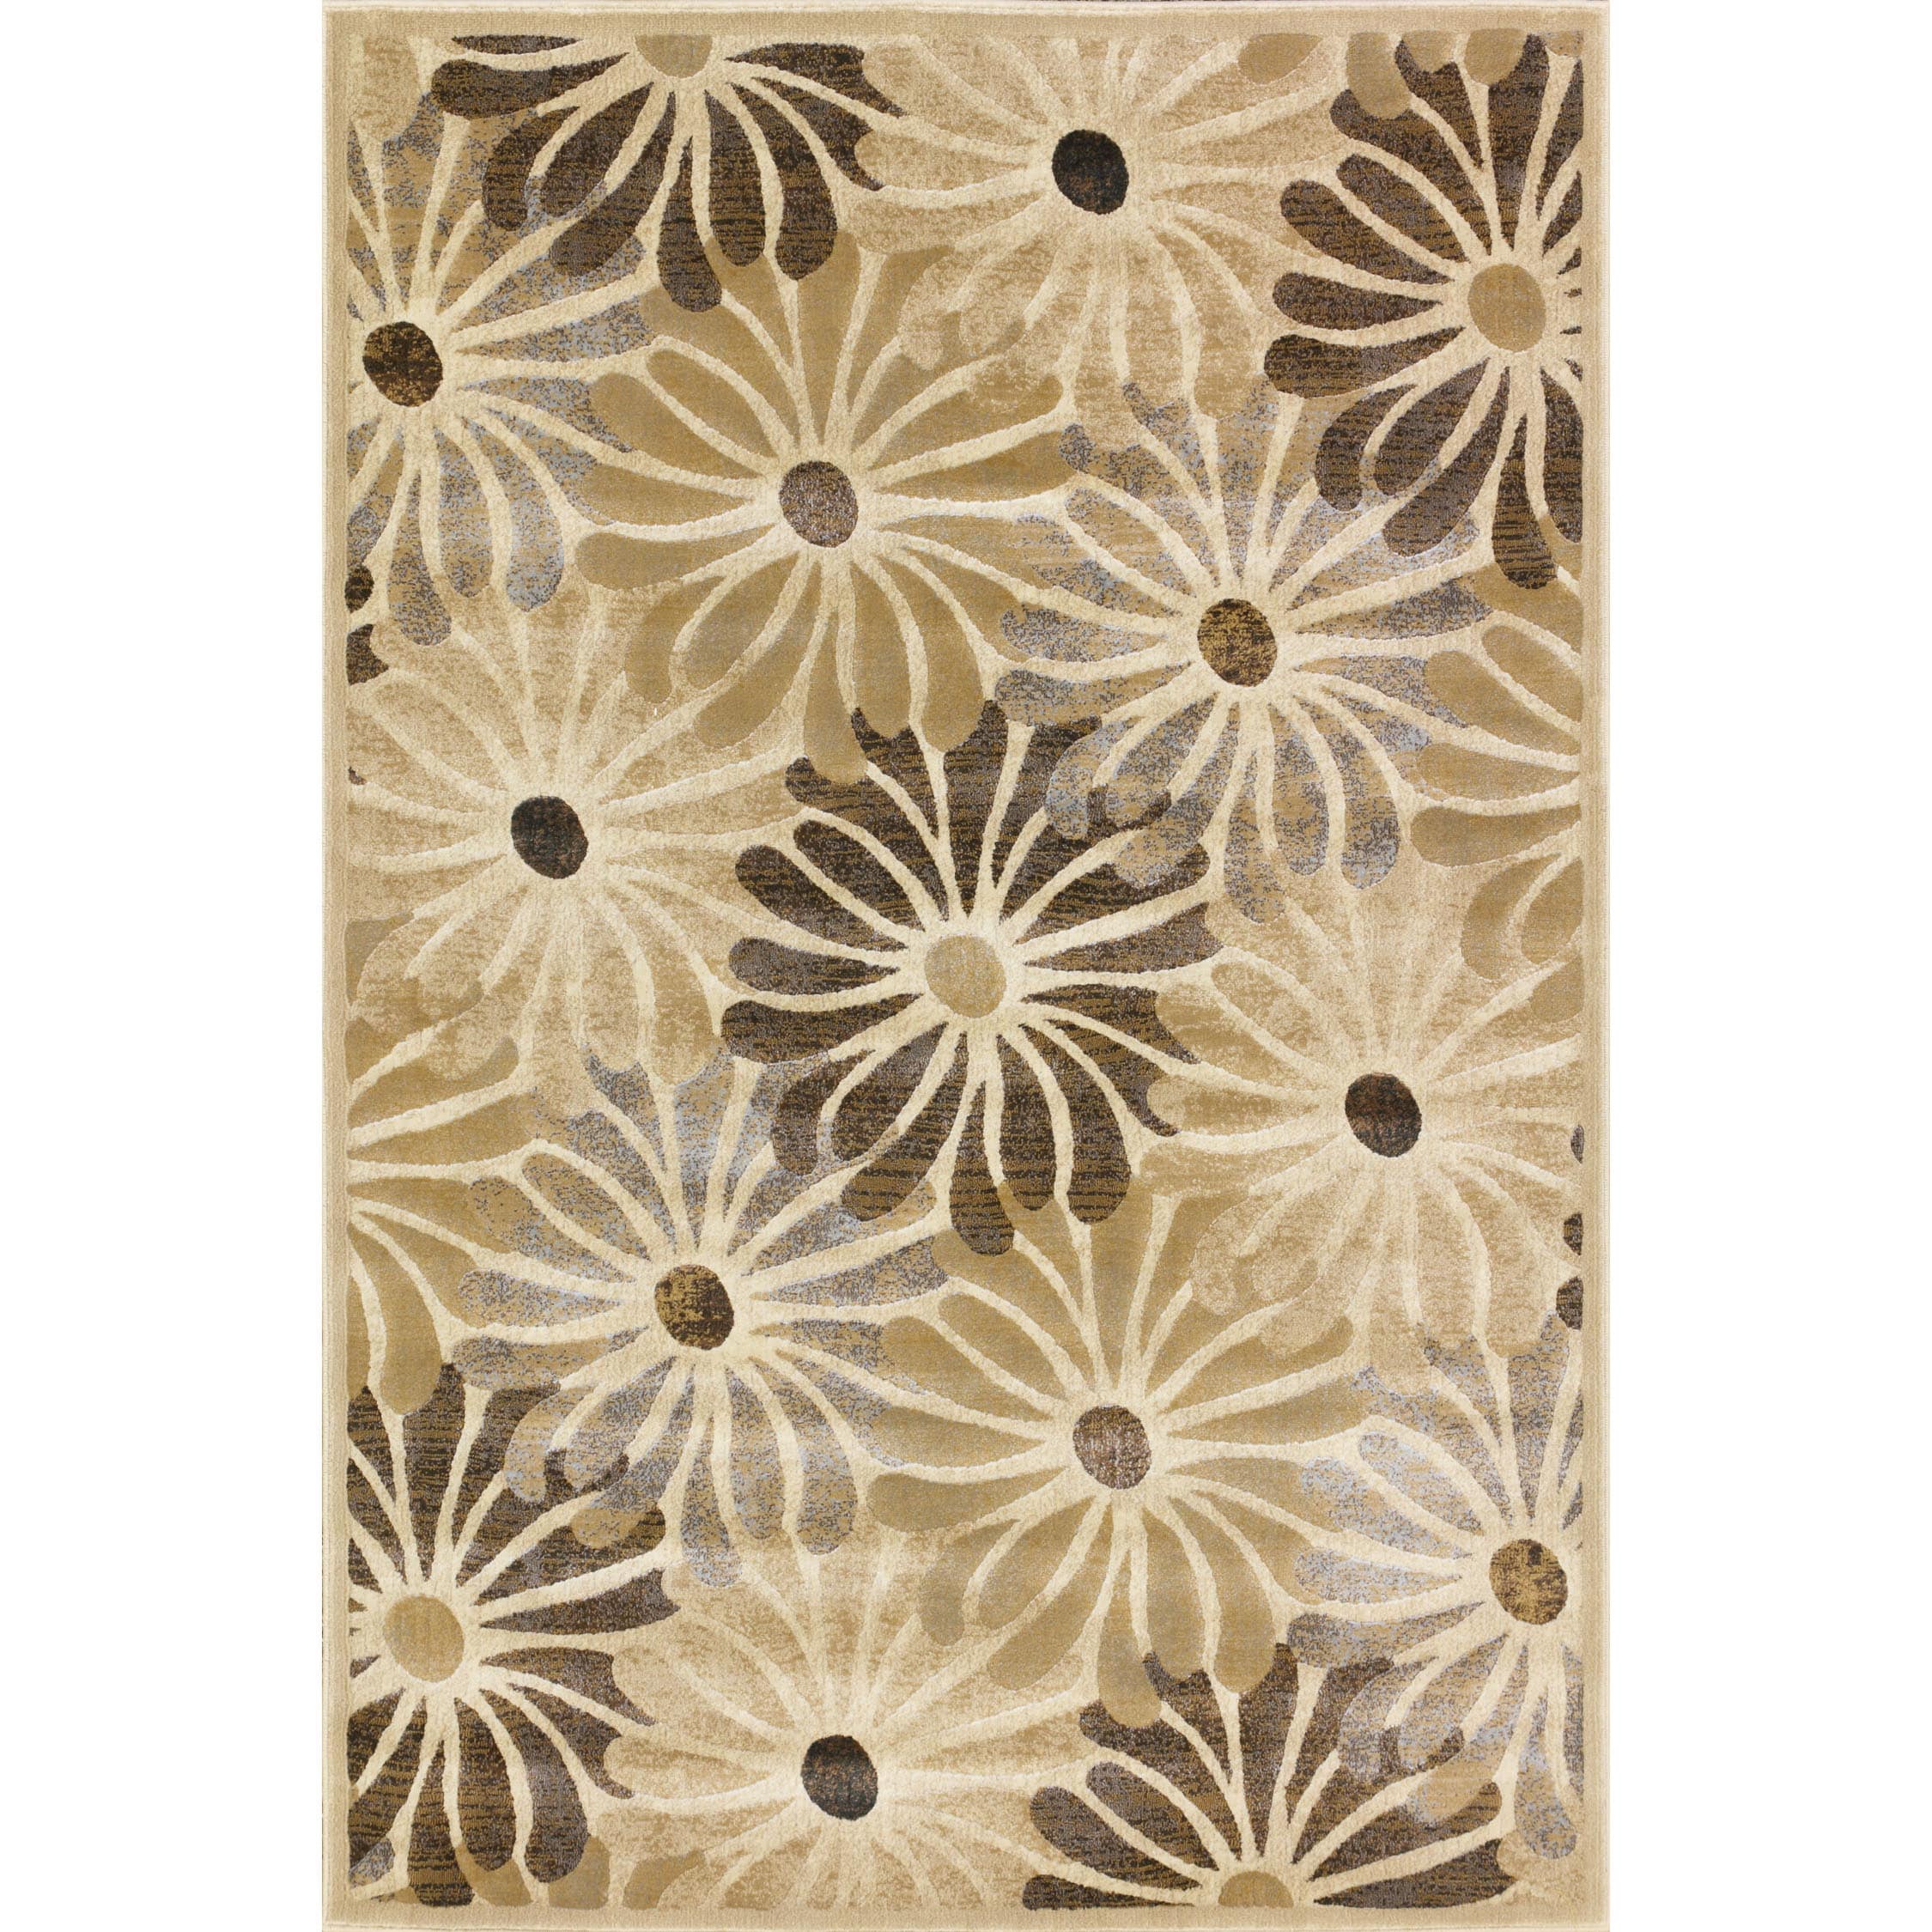 Providence Ambrose Pearl Area Rug (5 x 76) Today $169.99